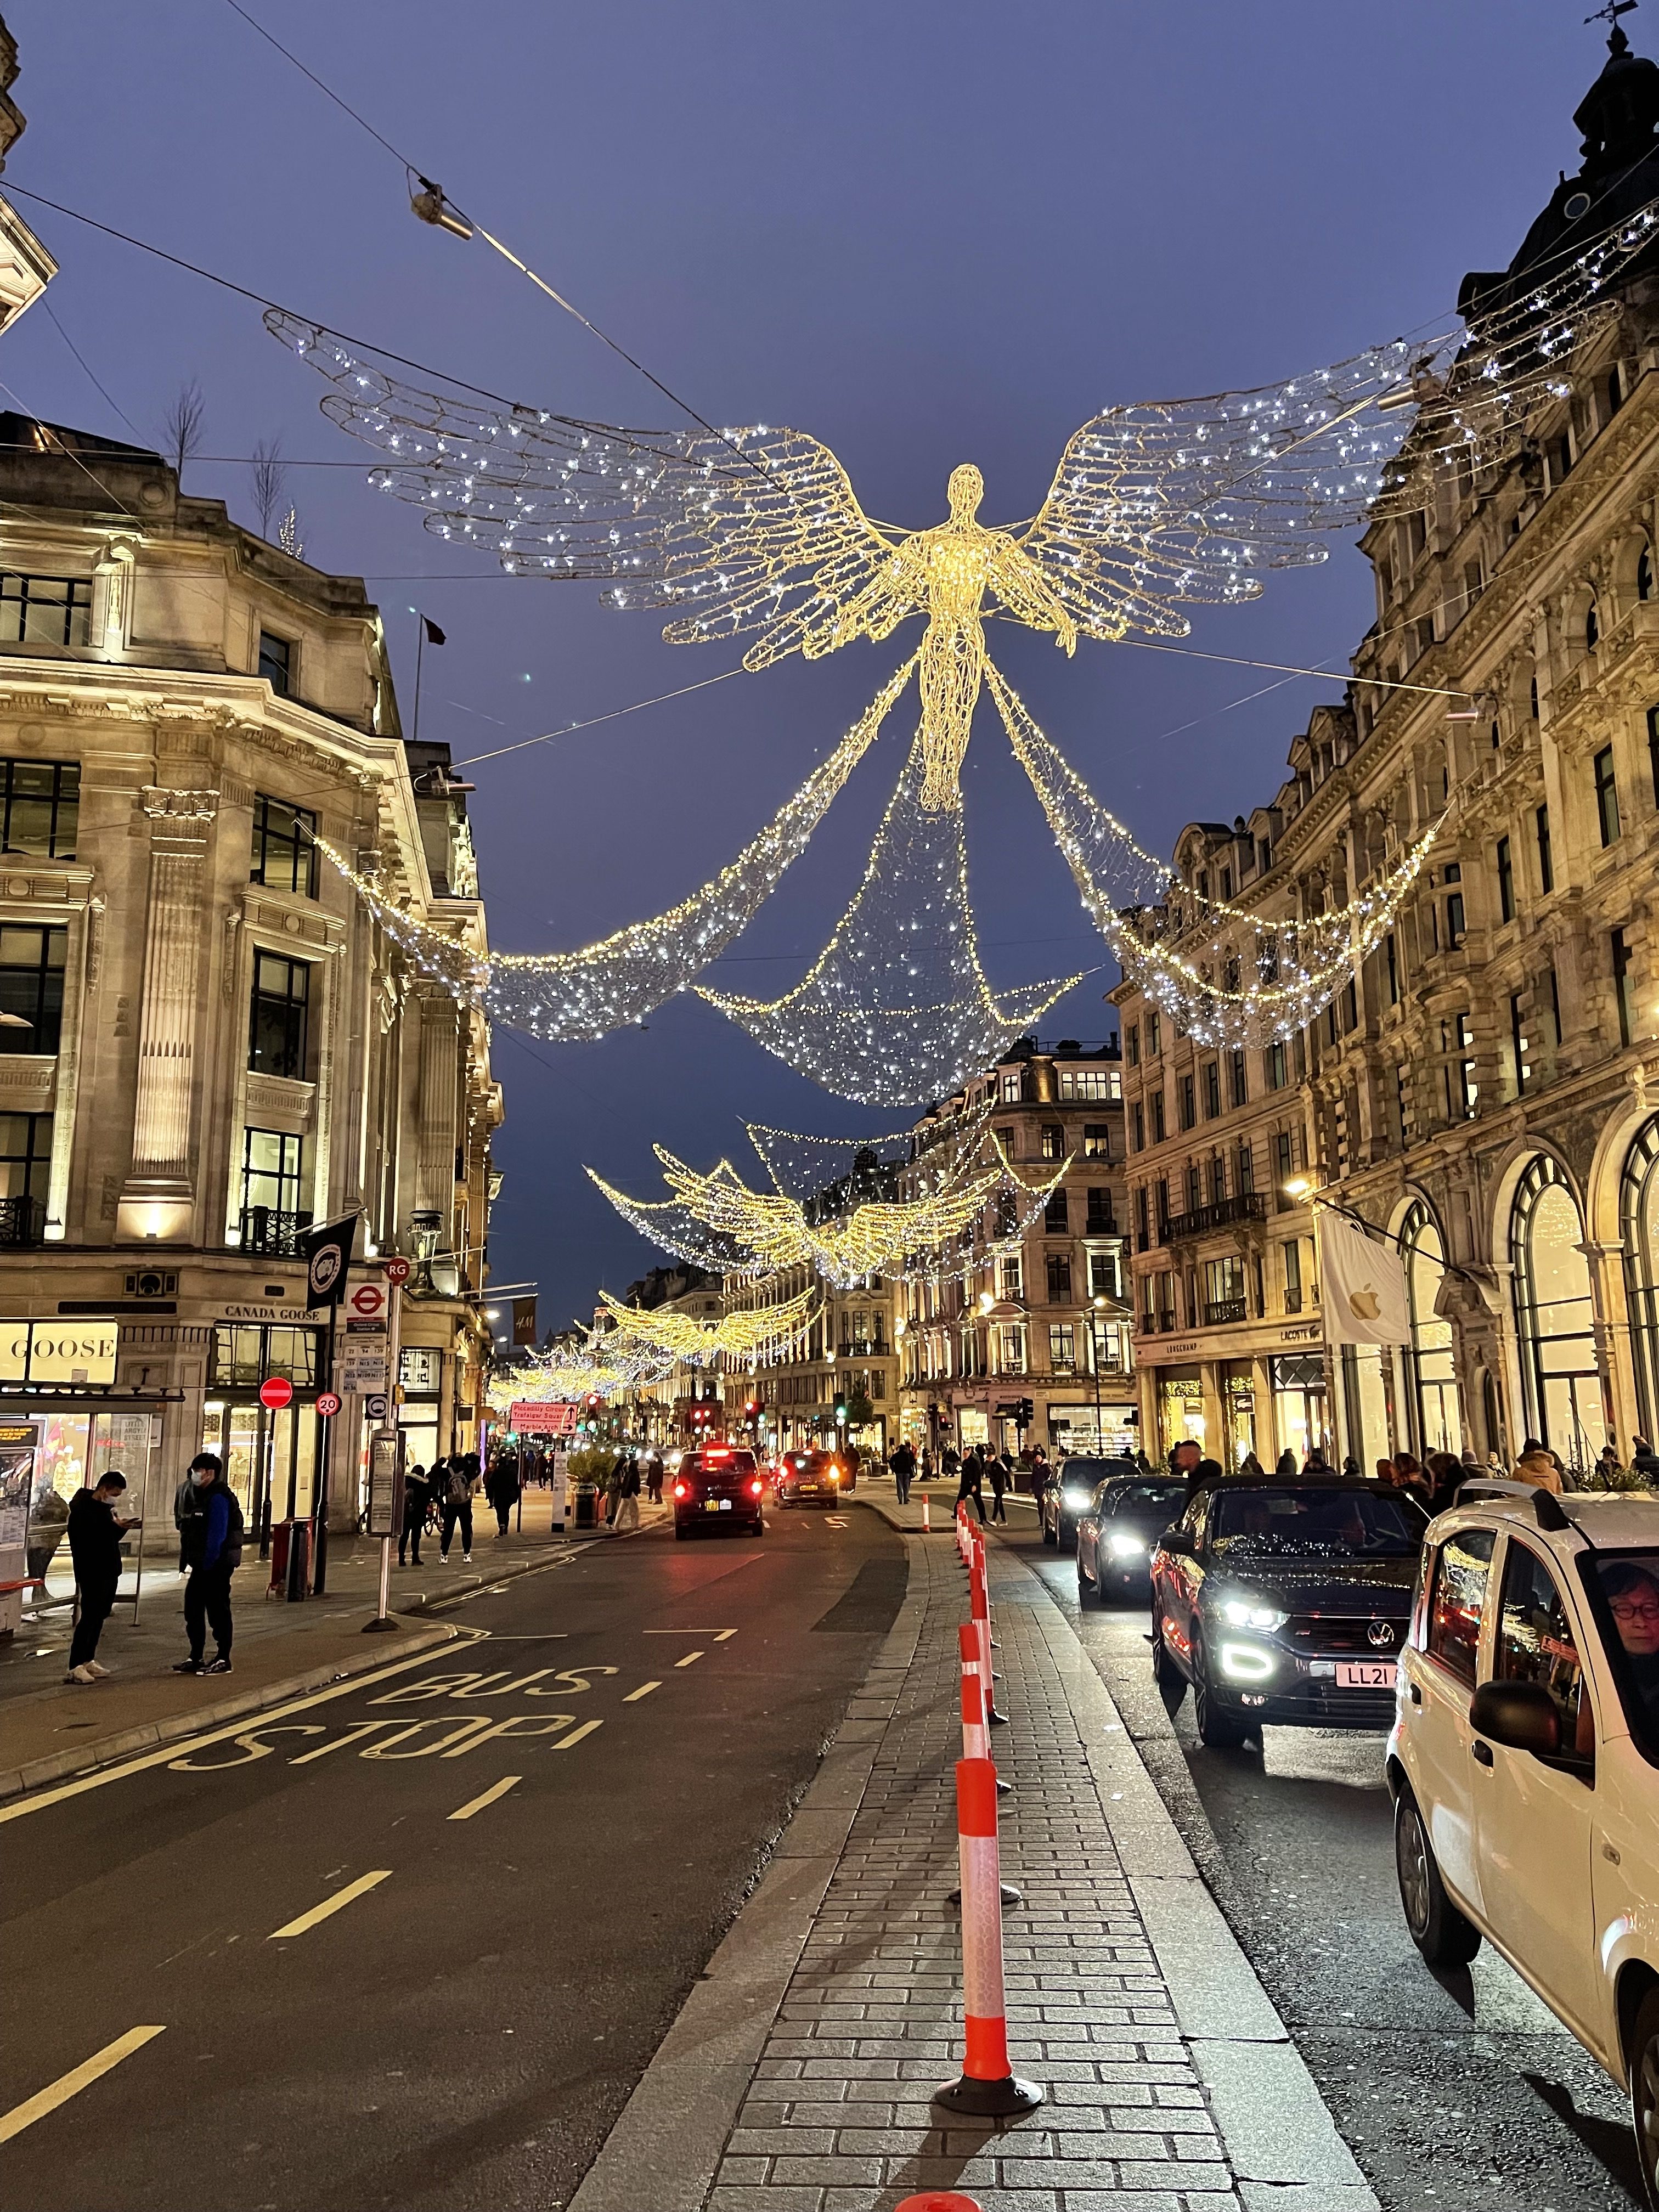 Reflection on My First Christmas Day Experience in London